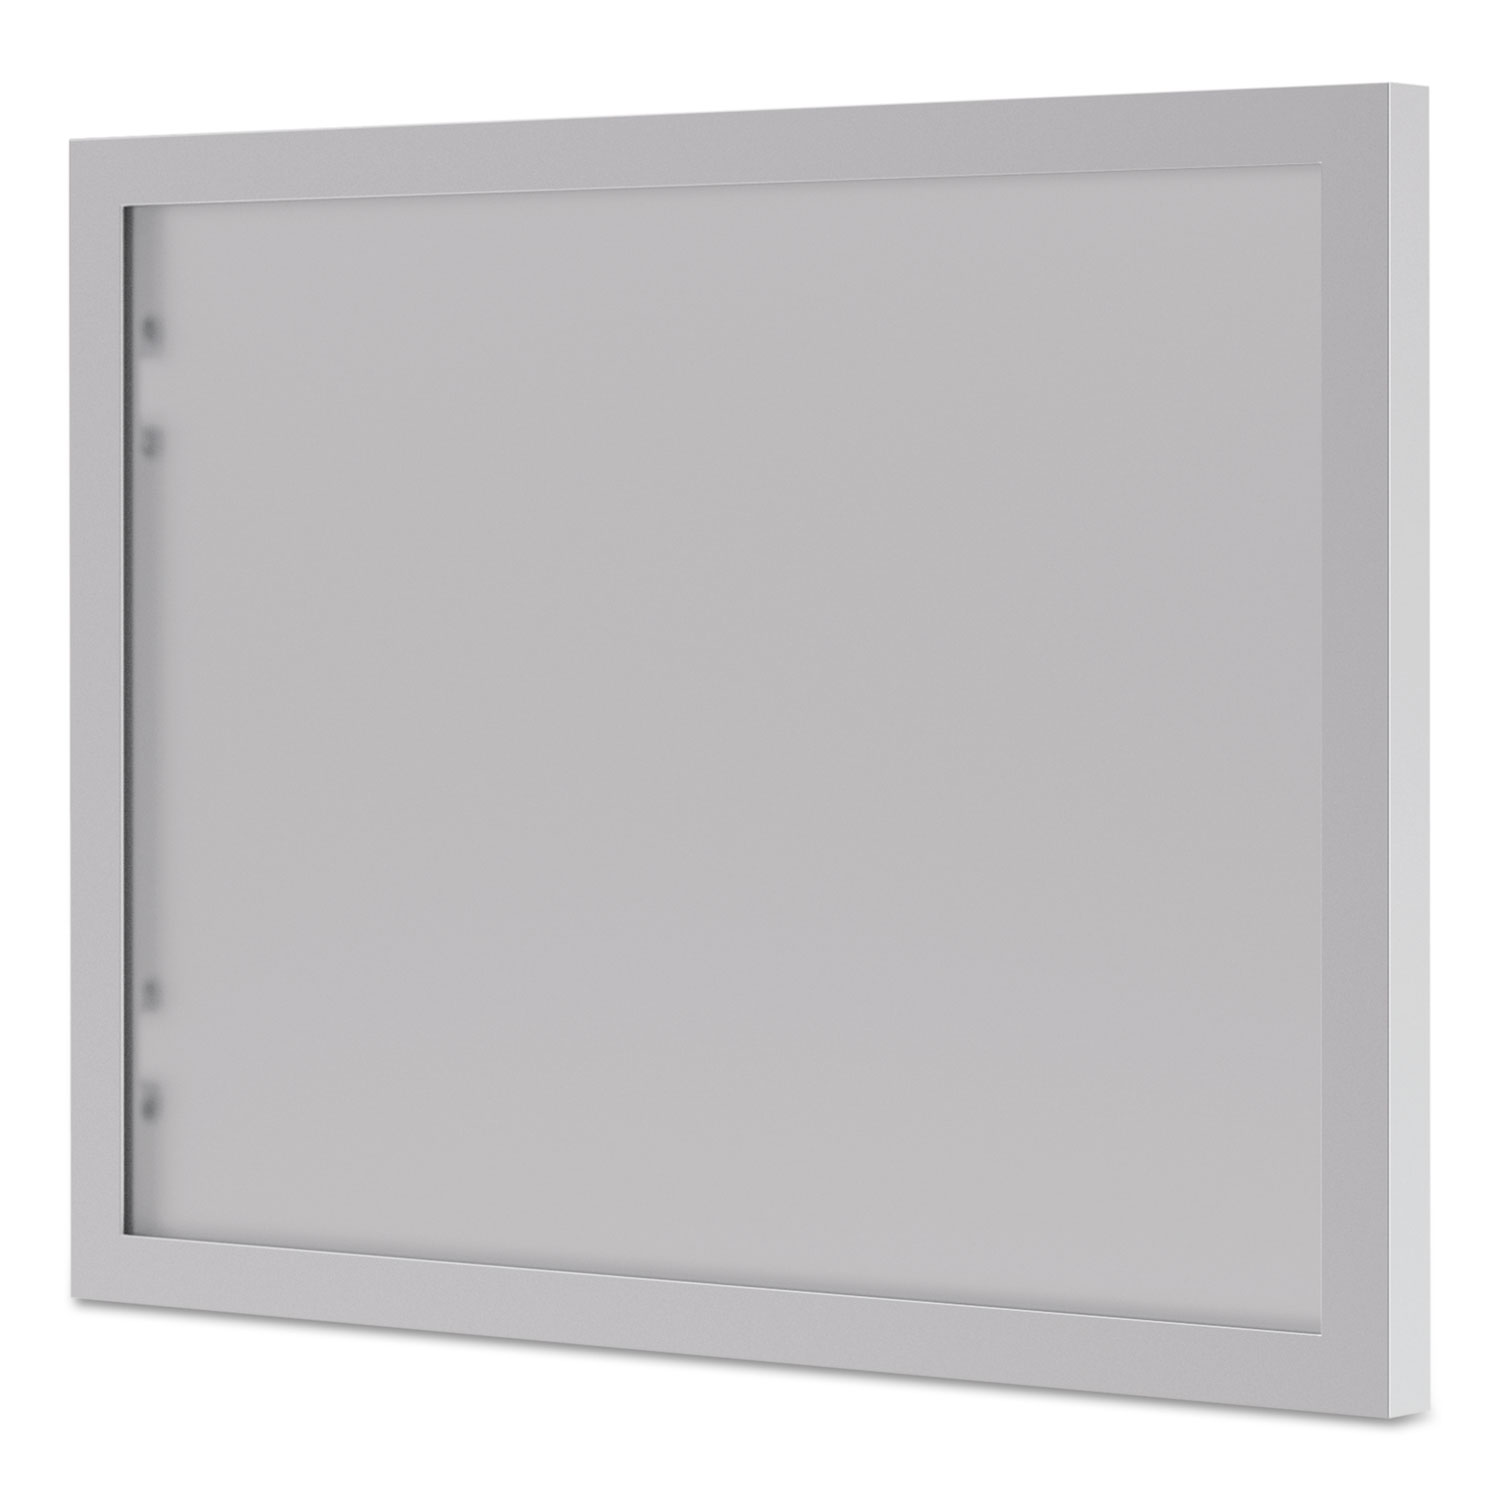  HON HBL72HDG BL Series Hutch Doors, Glass, 13.25w x 17.38h, Silver/Frosted (BSXBL72HDG) 